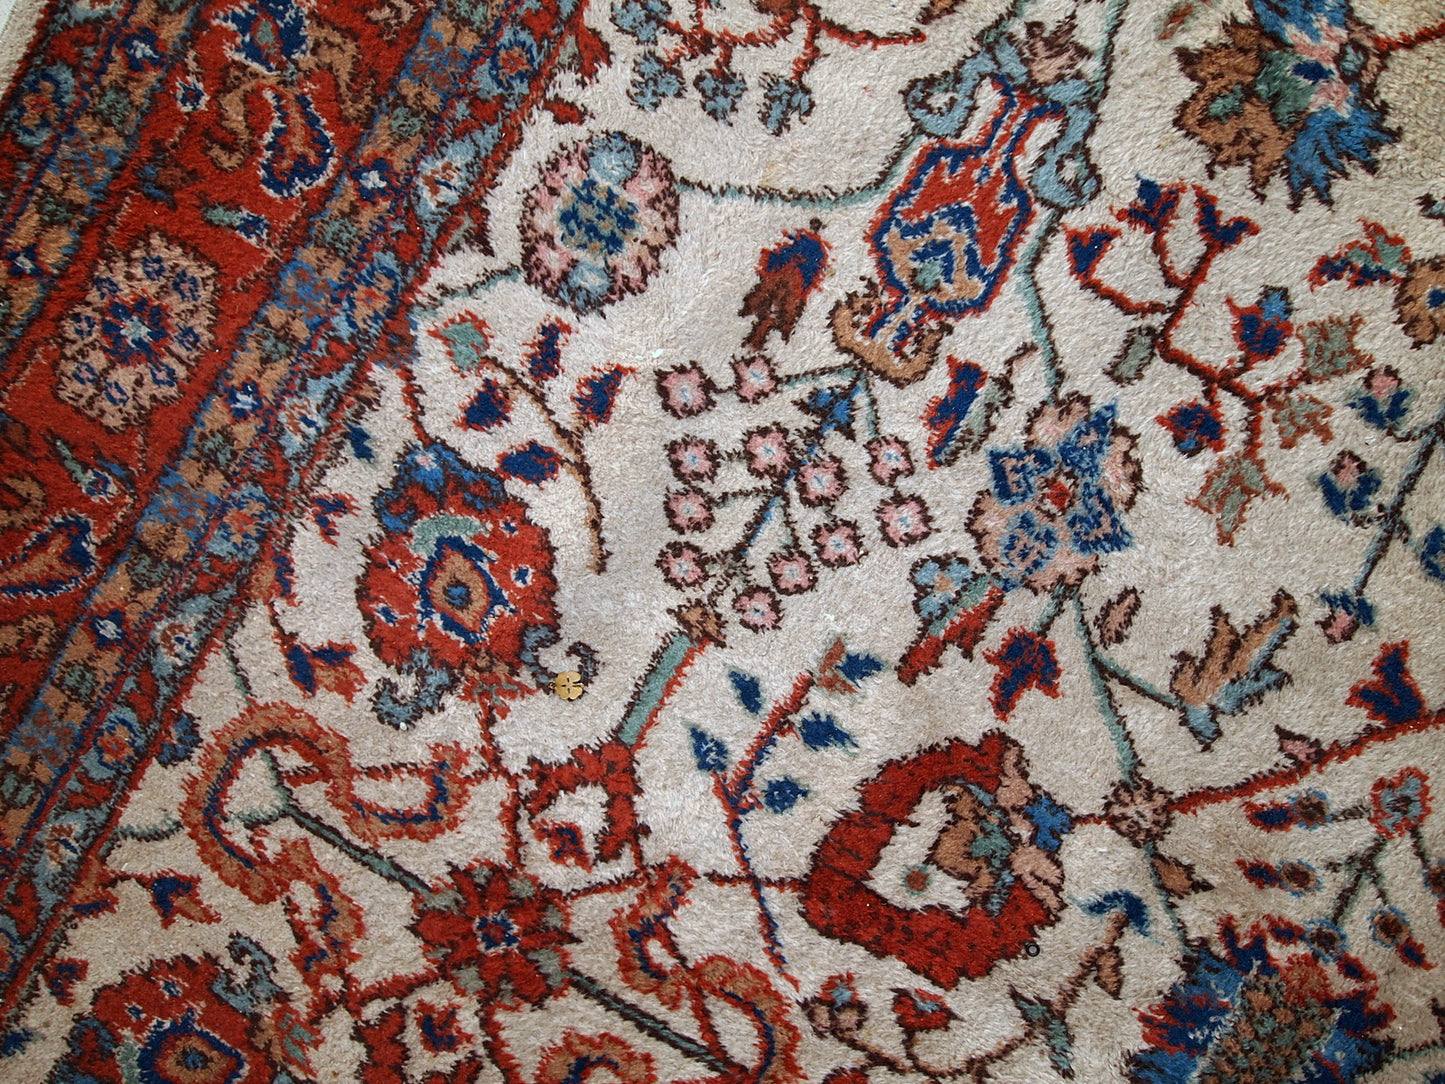 Handmade vintage Persian Mashad rug in beige shades and original good condition. Beautiful all-over design with garden accent is in blue and red colors.